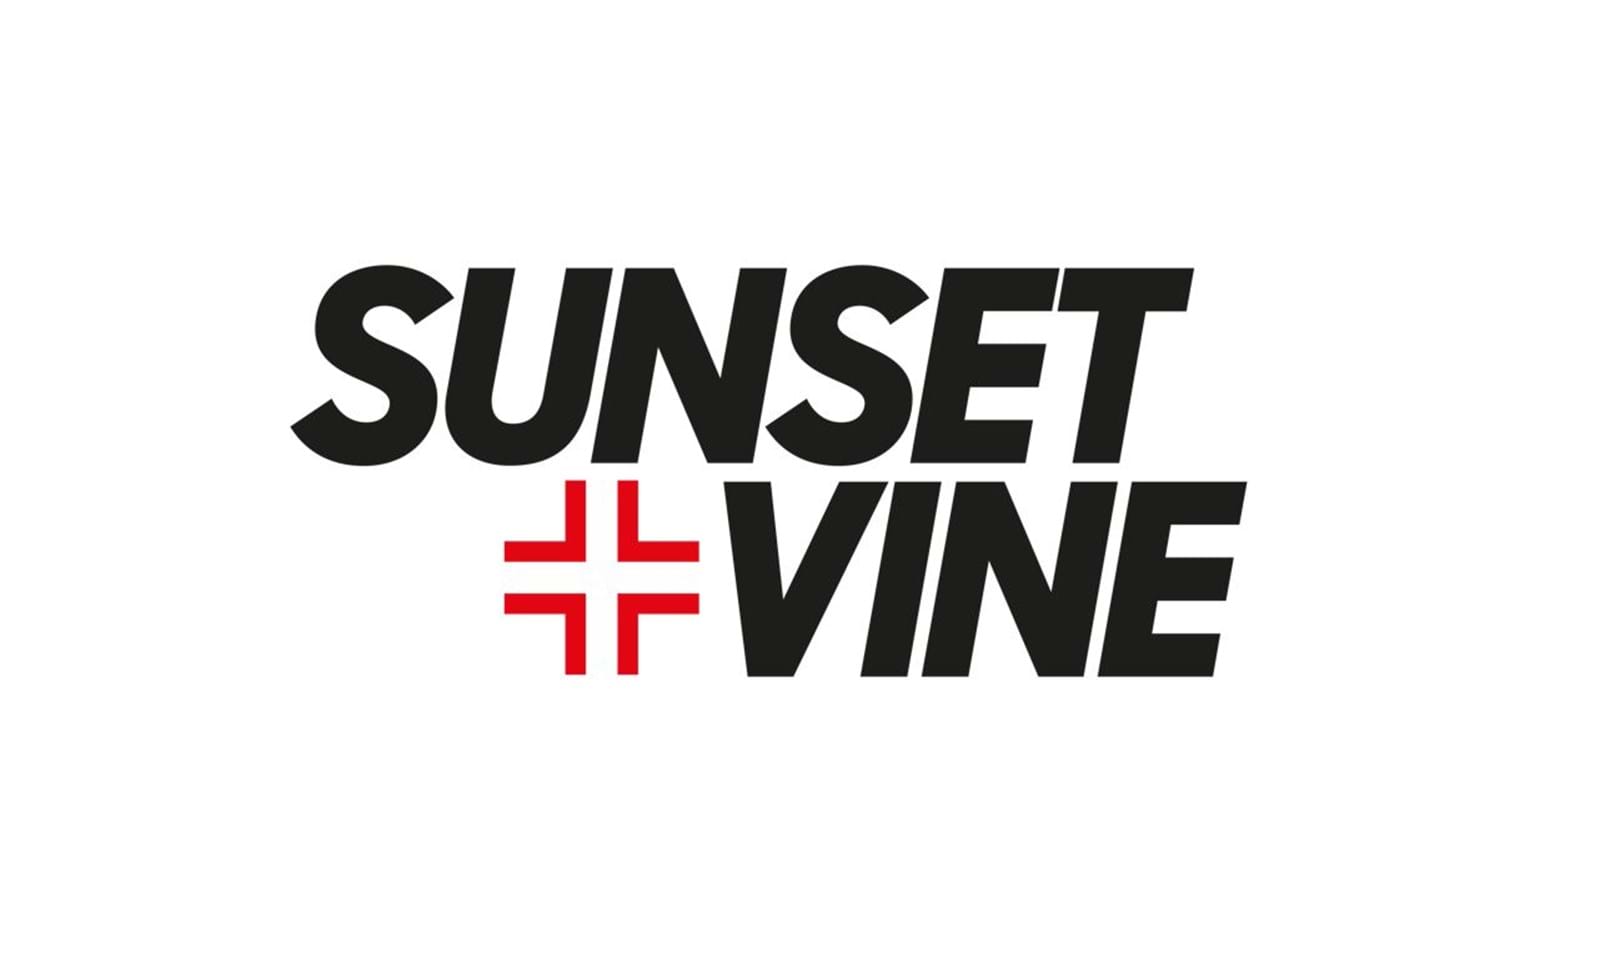 Sunset+Vine appoint Peter Angell as CEO